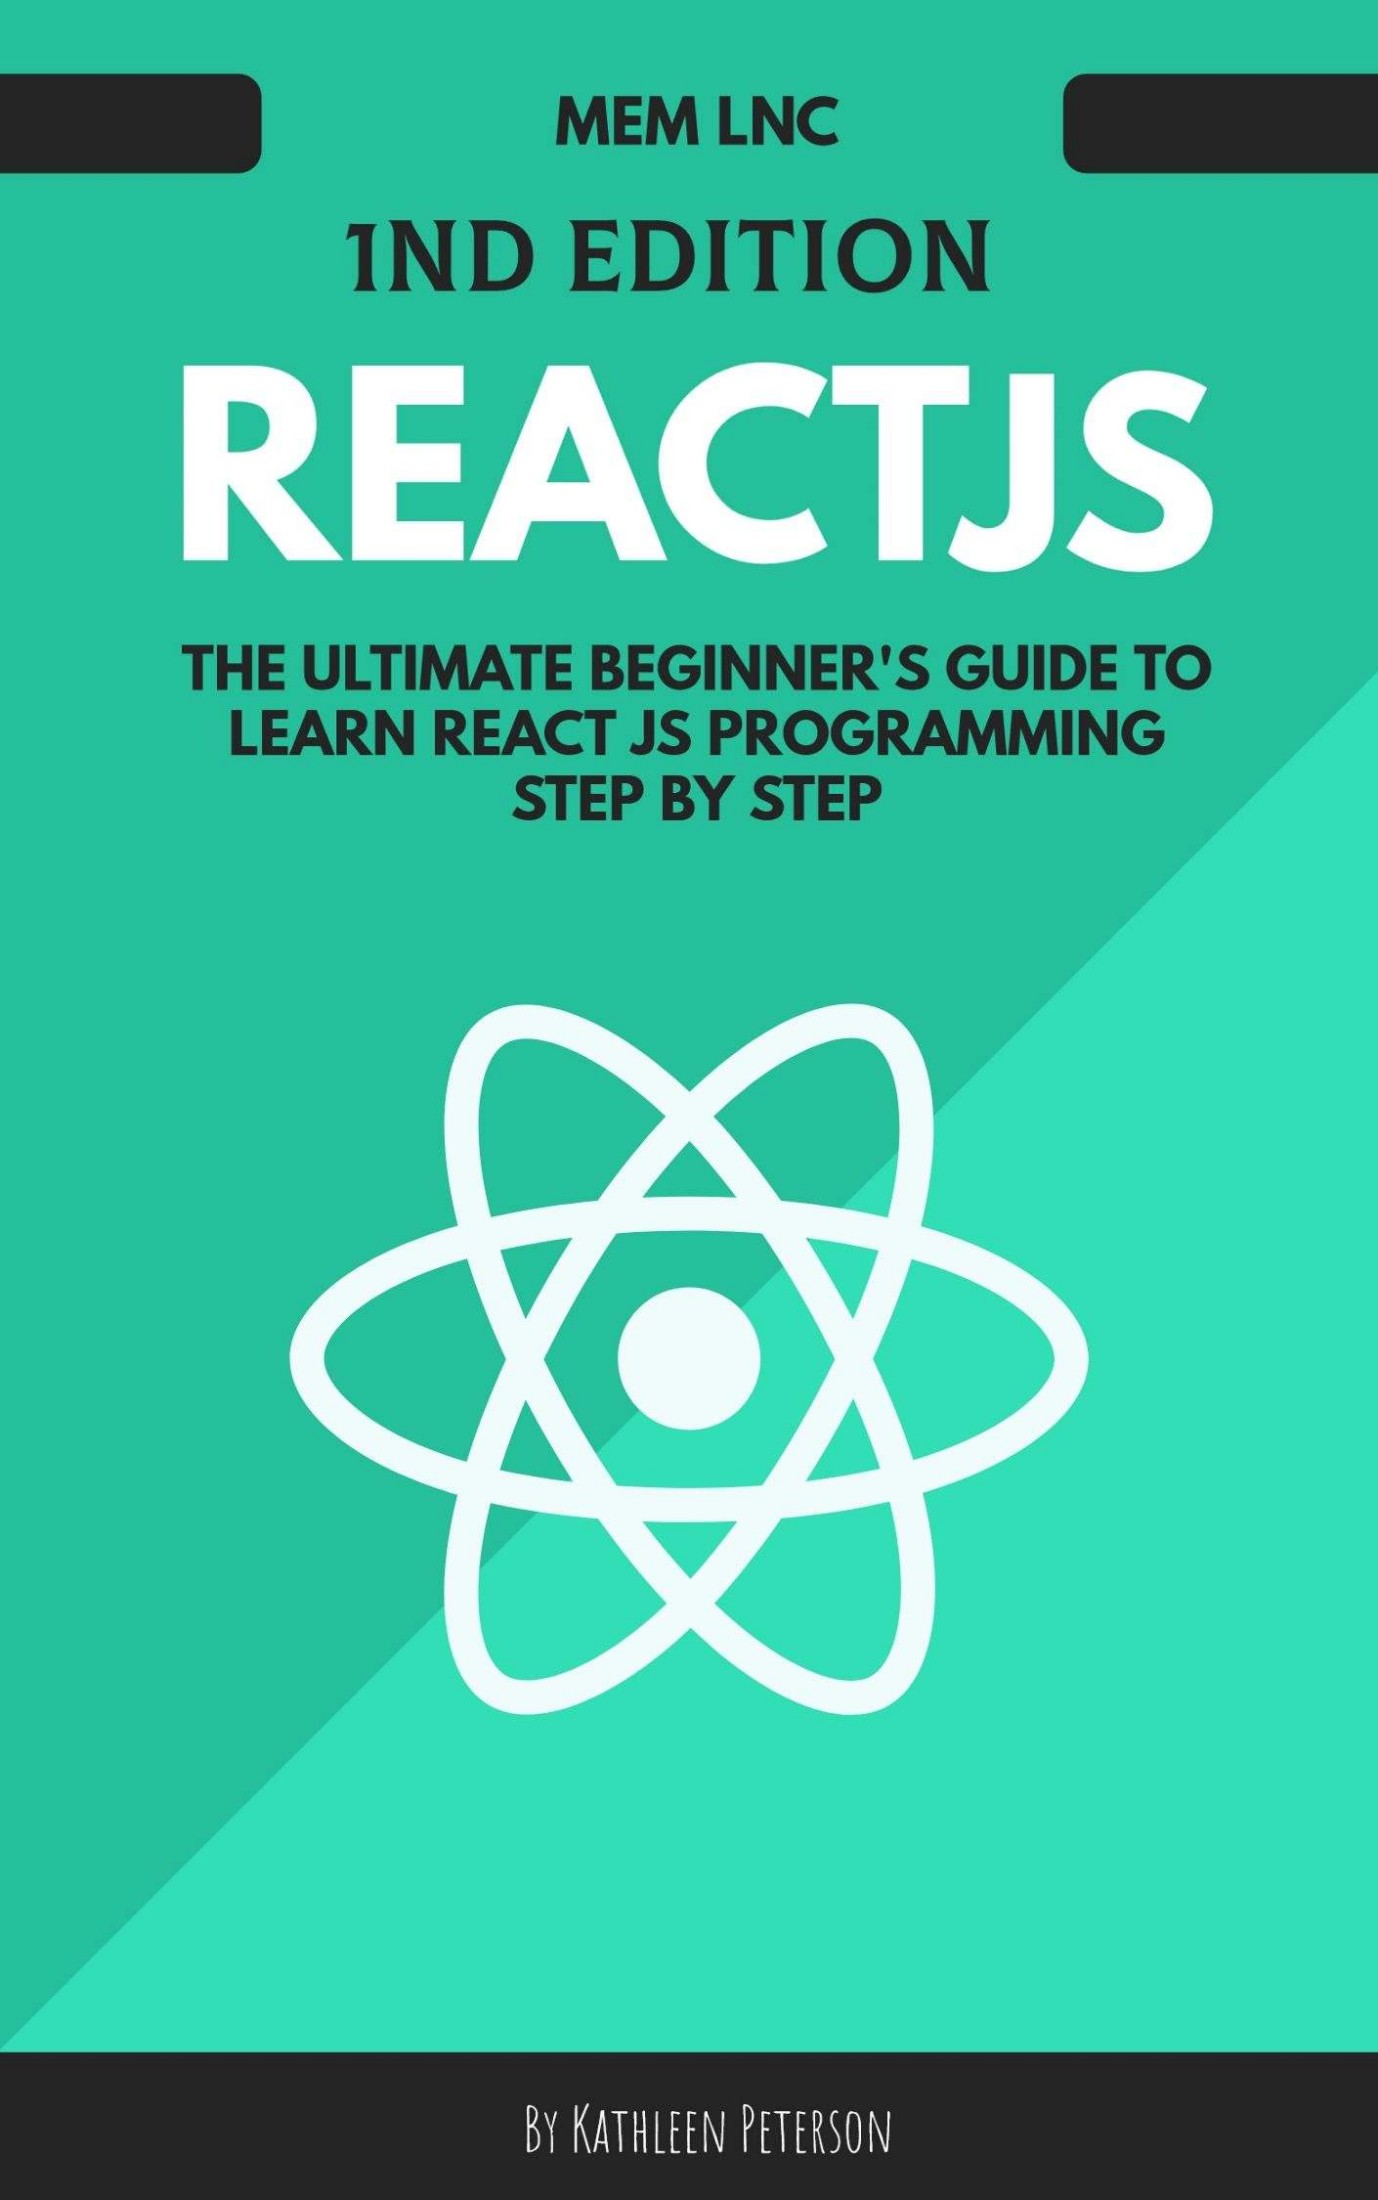 React Js: The Ultimate Beginner's Guide to Learn React Js Programming Step by Step - 2020